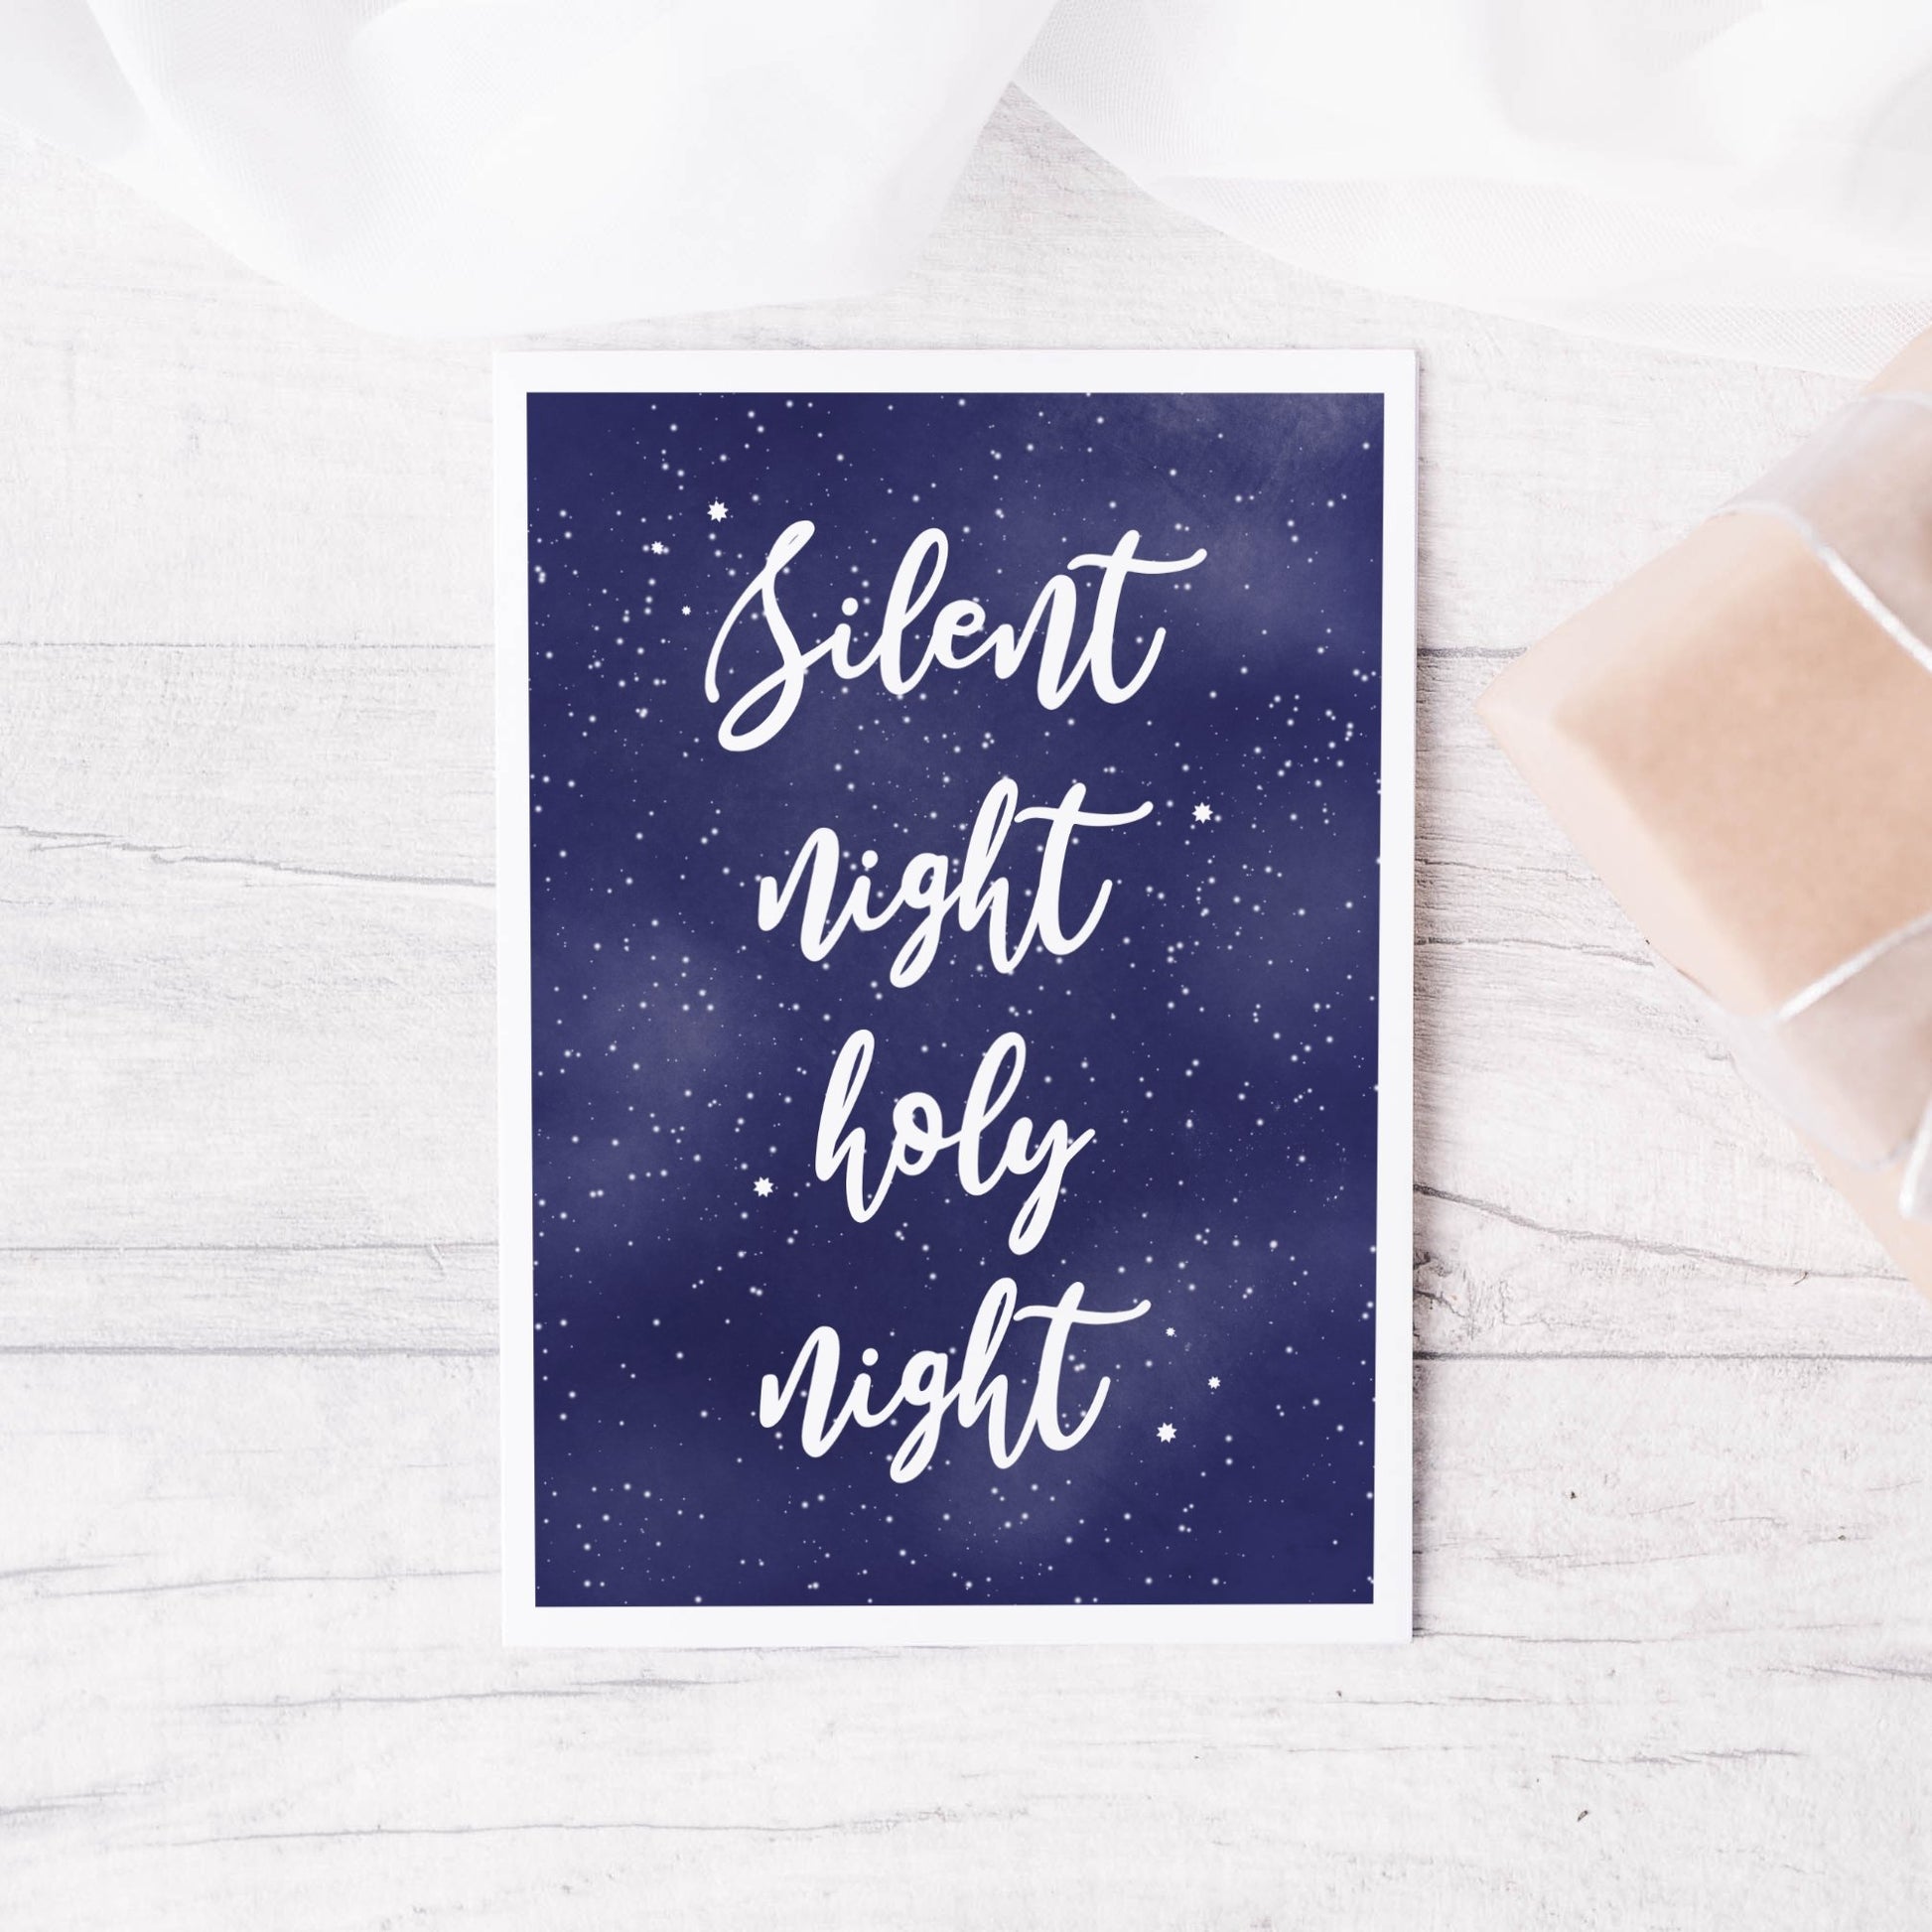 Silent night christmas card - Dolly and Fred Designs